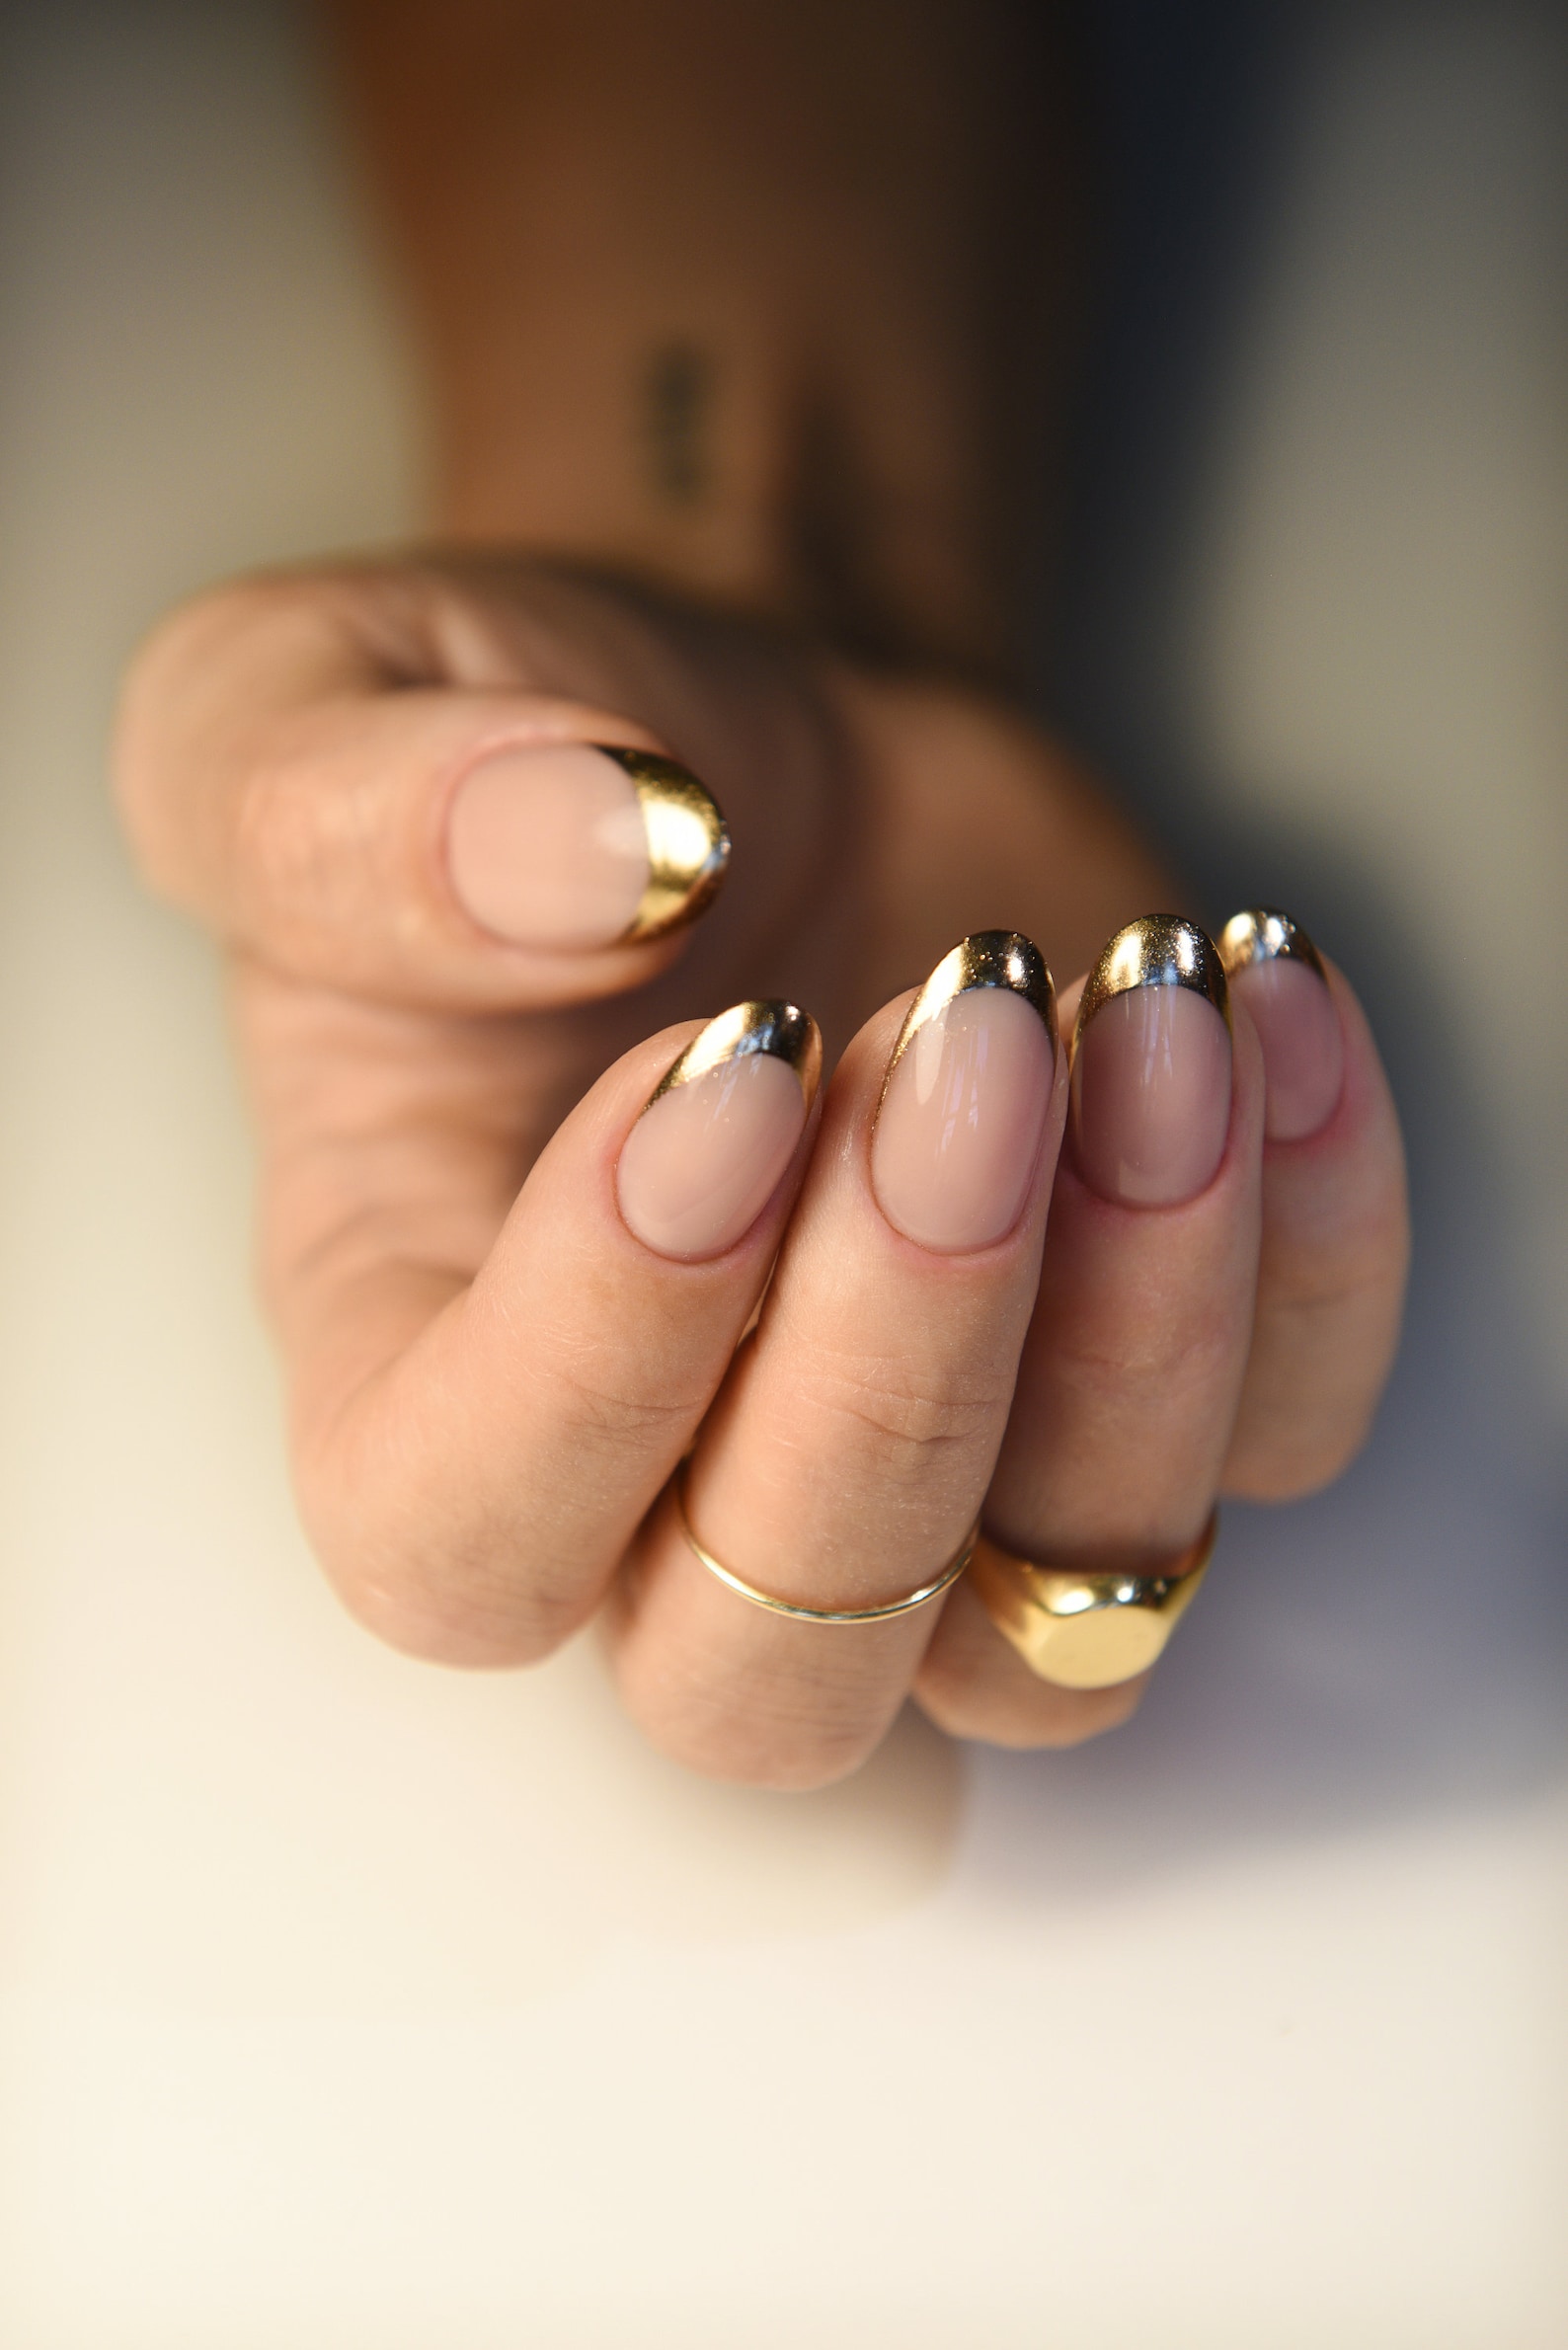 Dare to be a girly tomboy: French manicure in bold colors